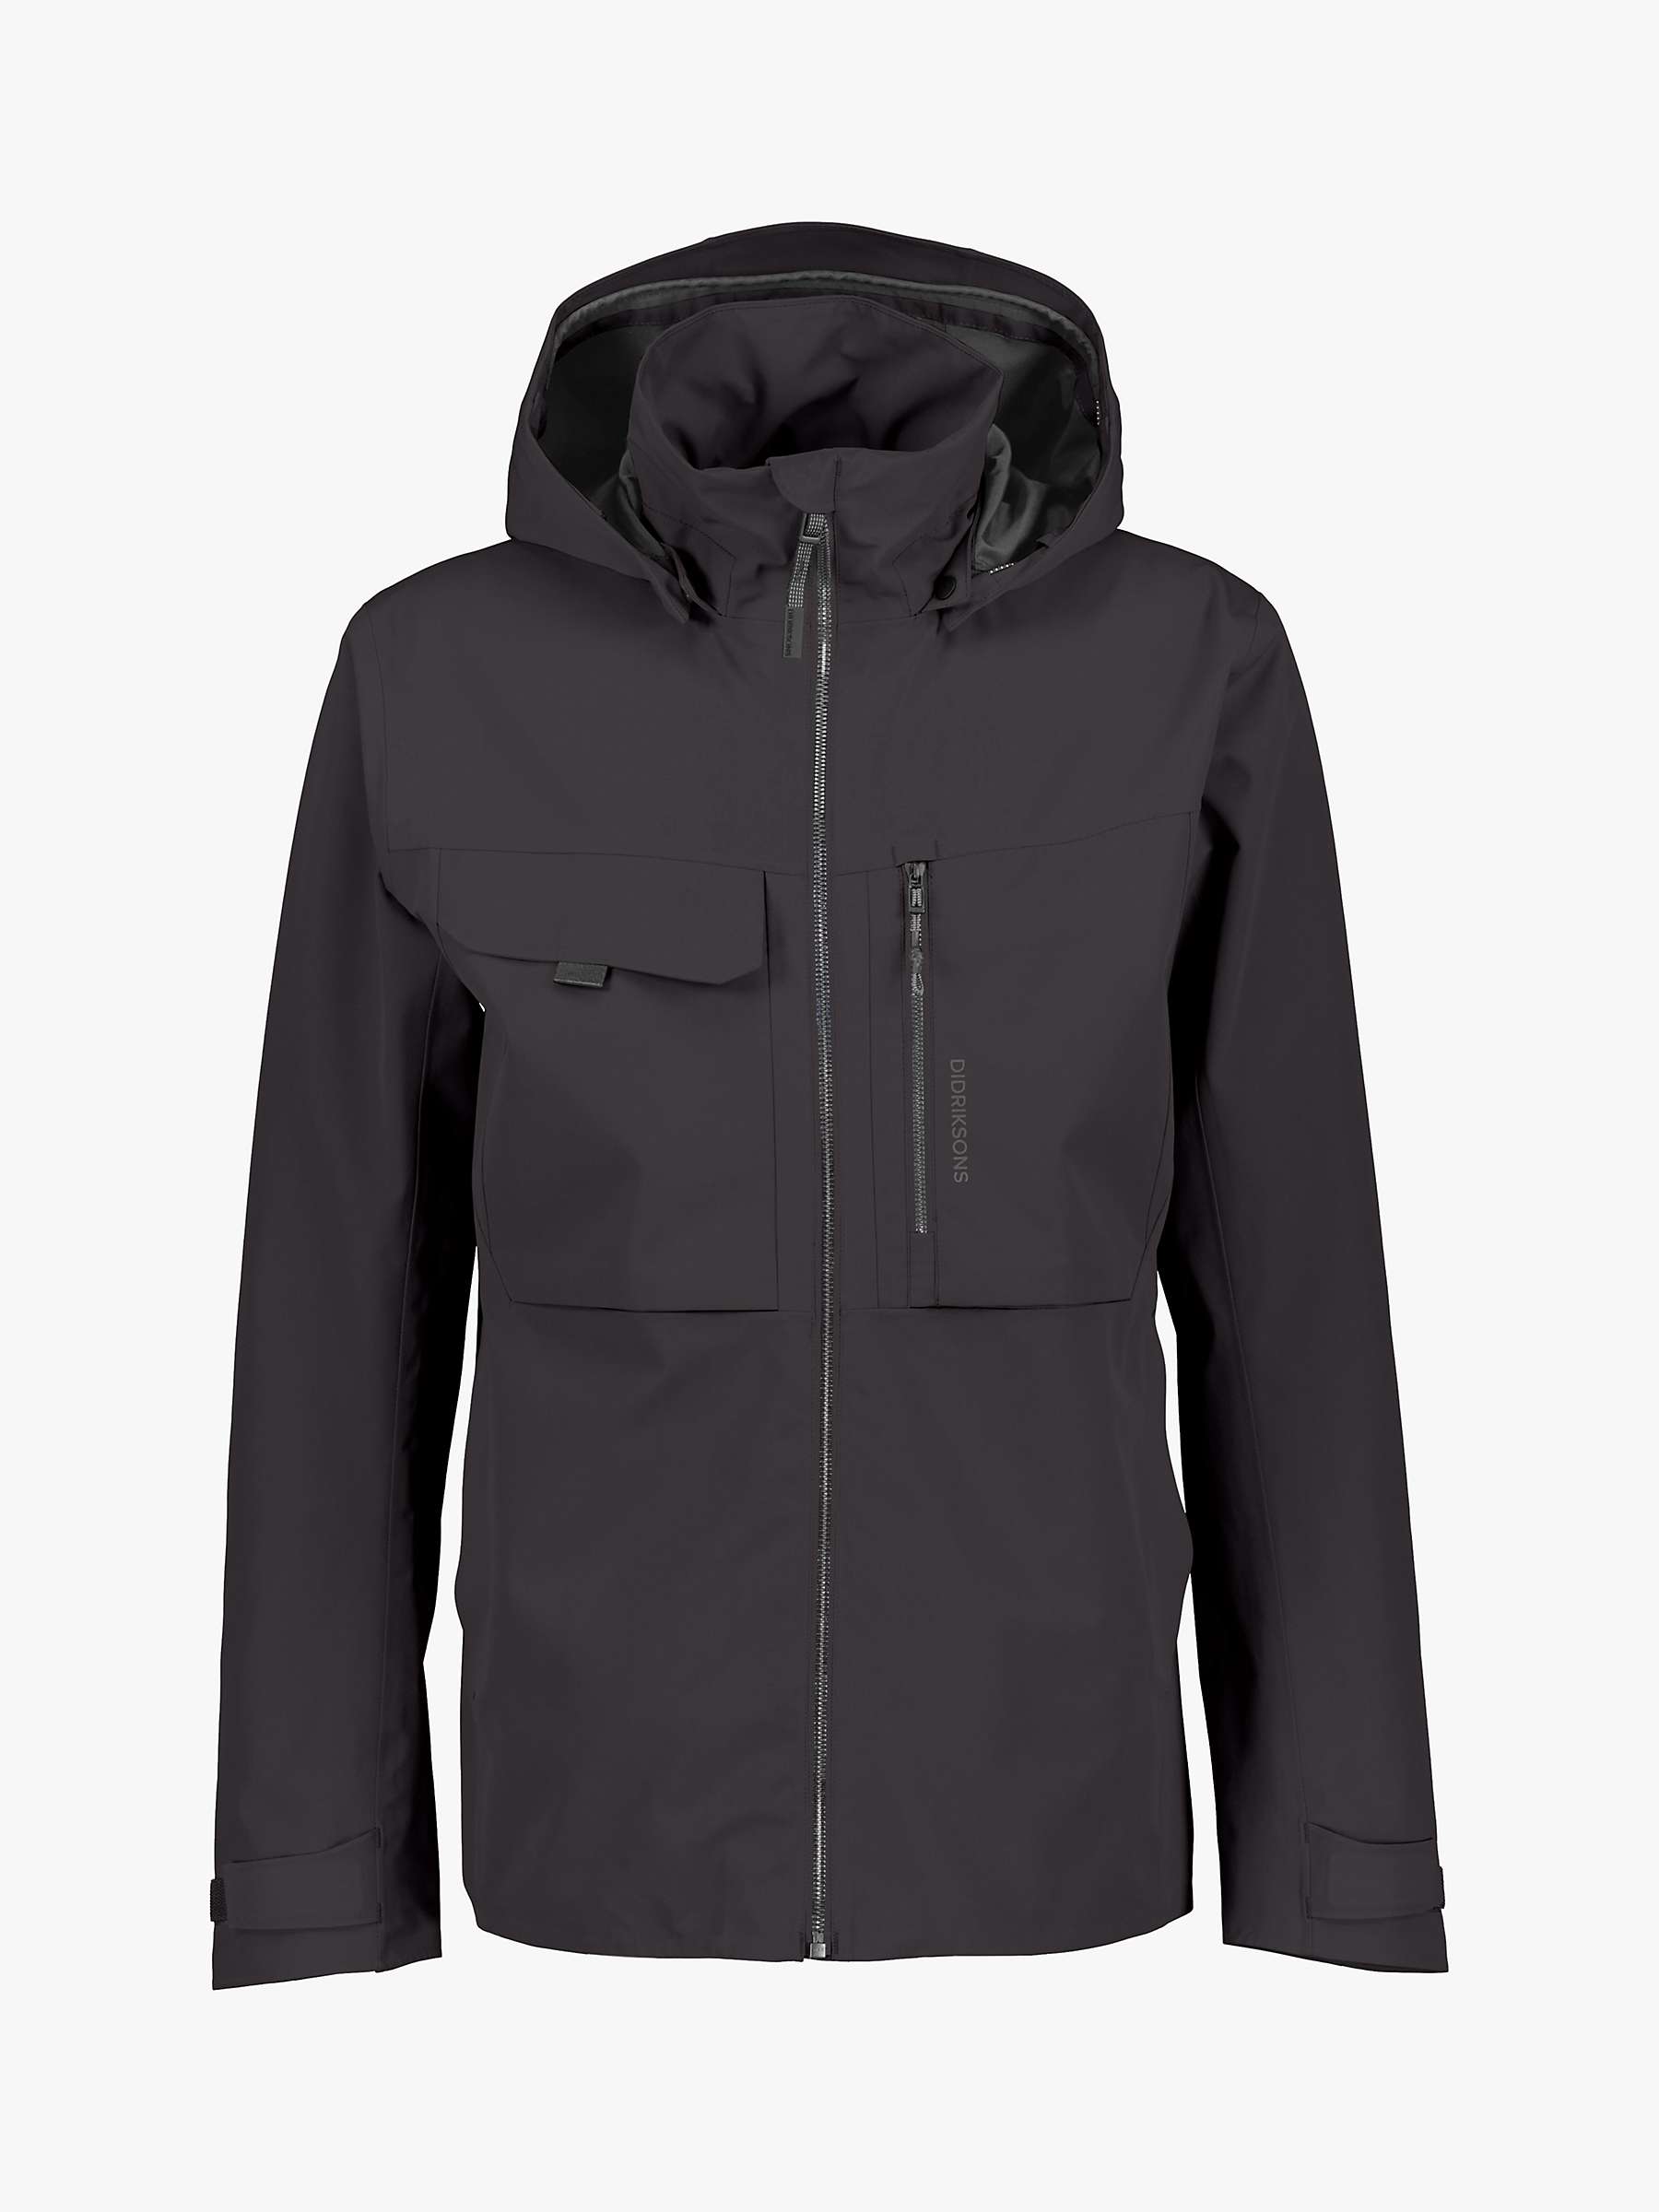 Buy Didriksons Aston Water Repellent Utility Jacket Online at johnlewis.com